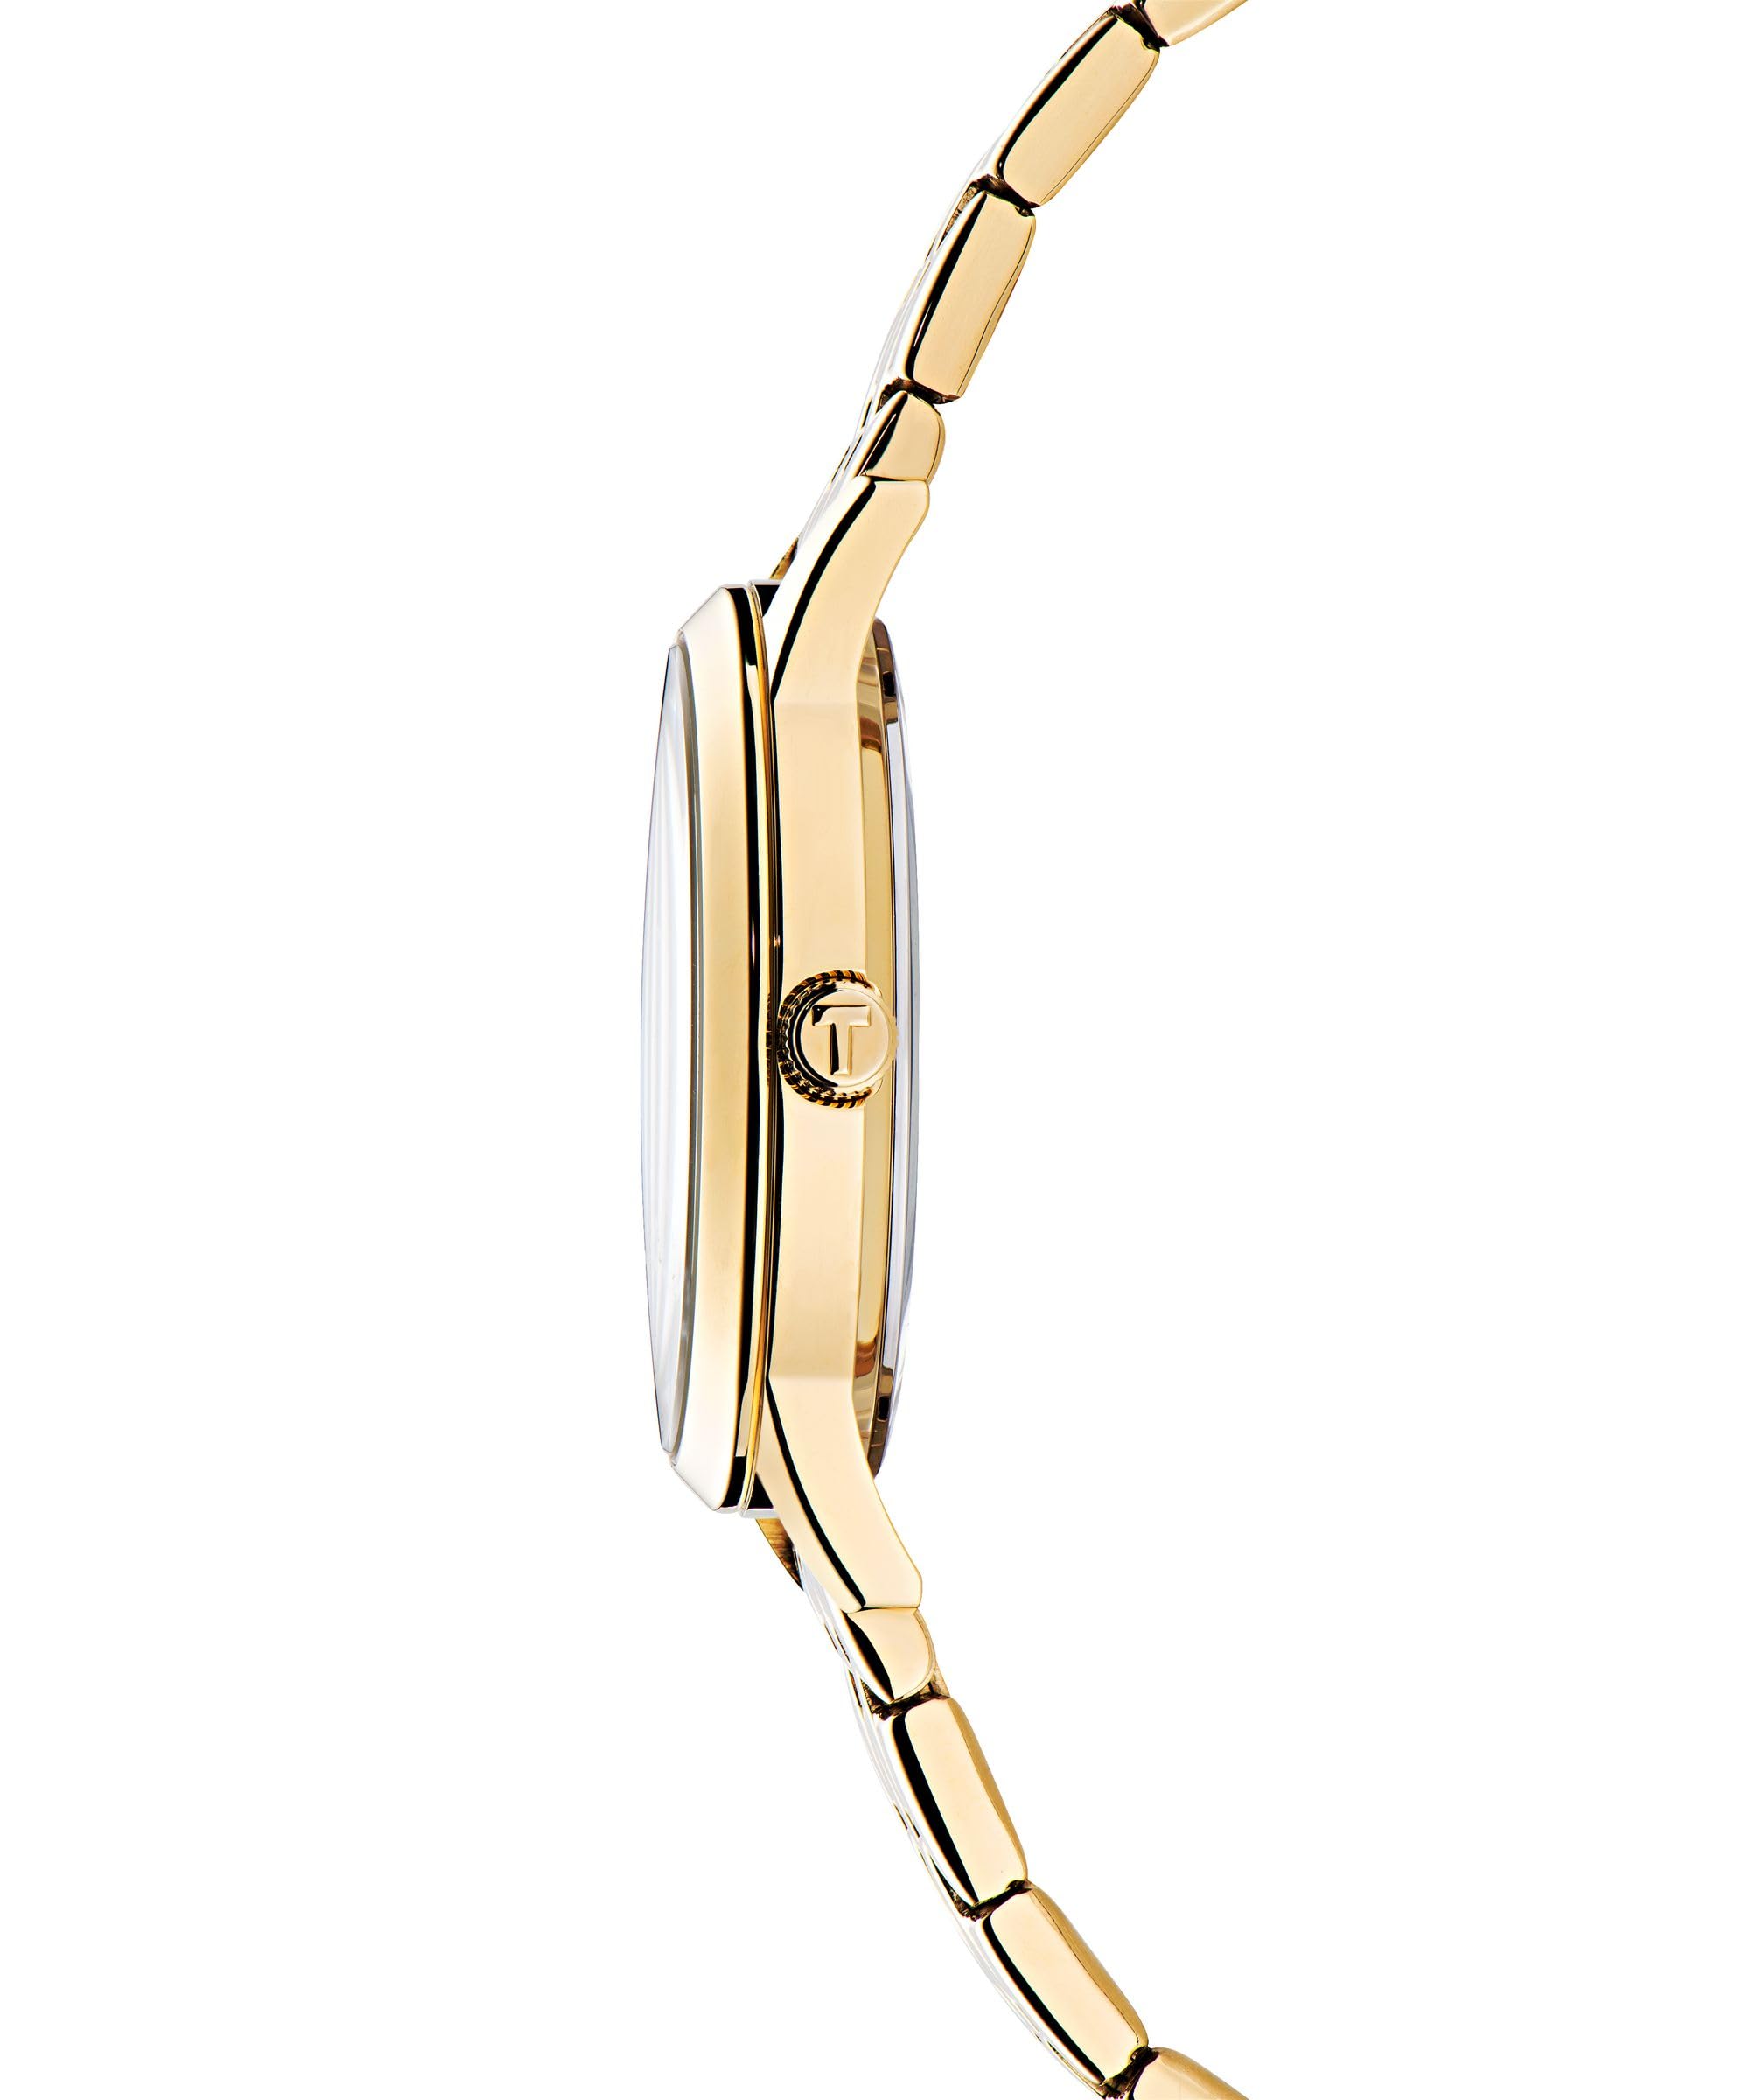 Ted Baker Fitzrovia Constellation Ladies Yellow Gold Stainless Steel Bracelet Watch (Model: BKPFZS4059I)